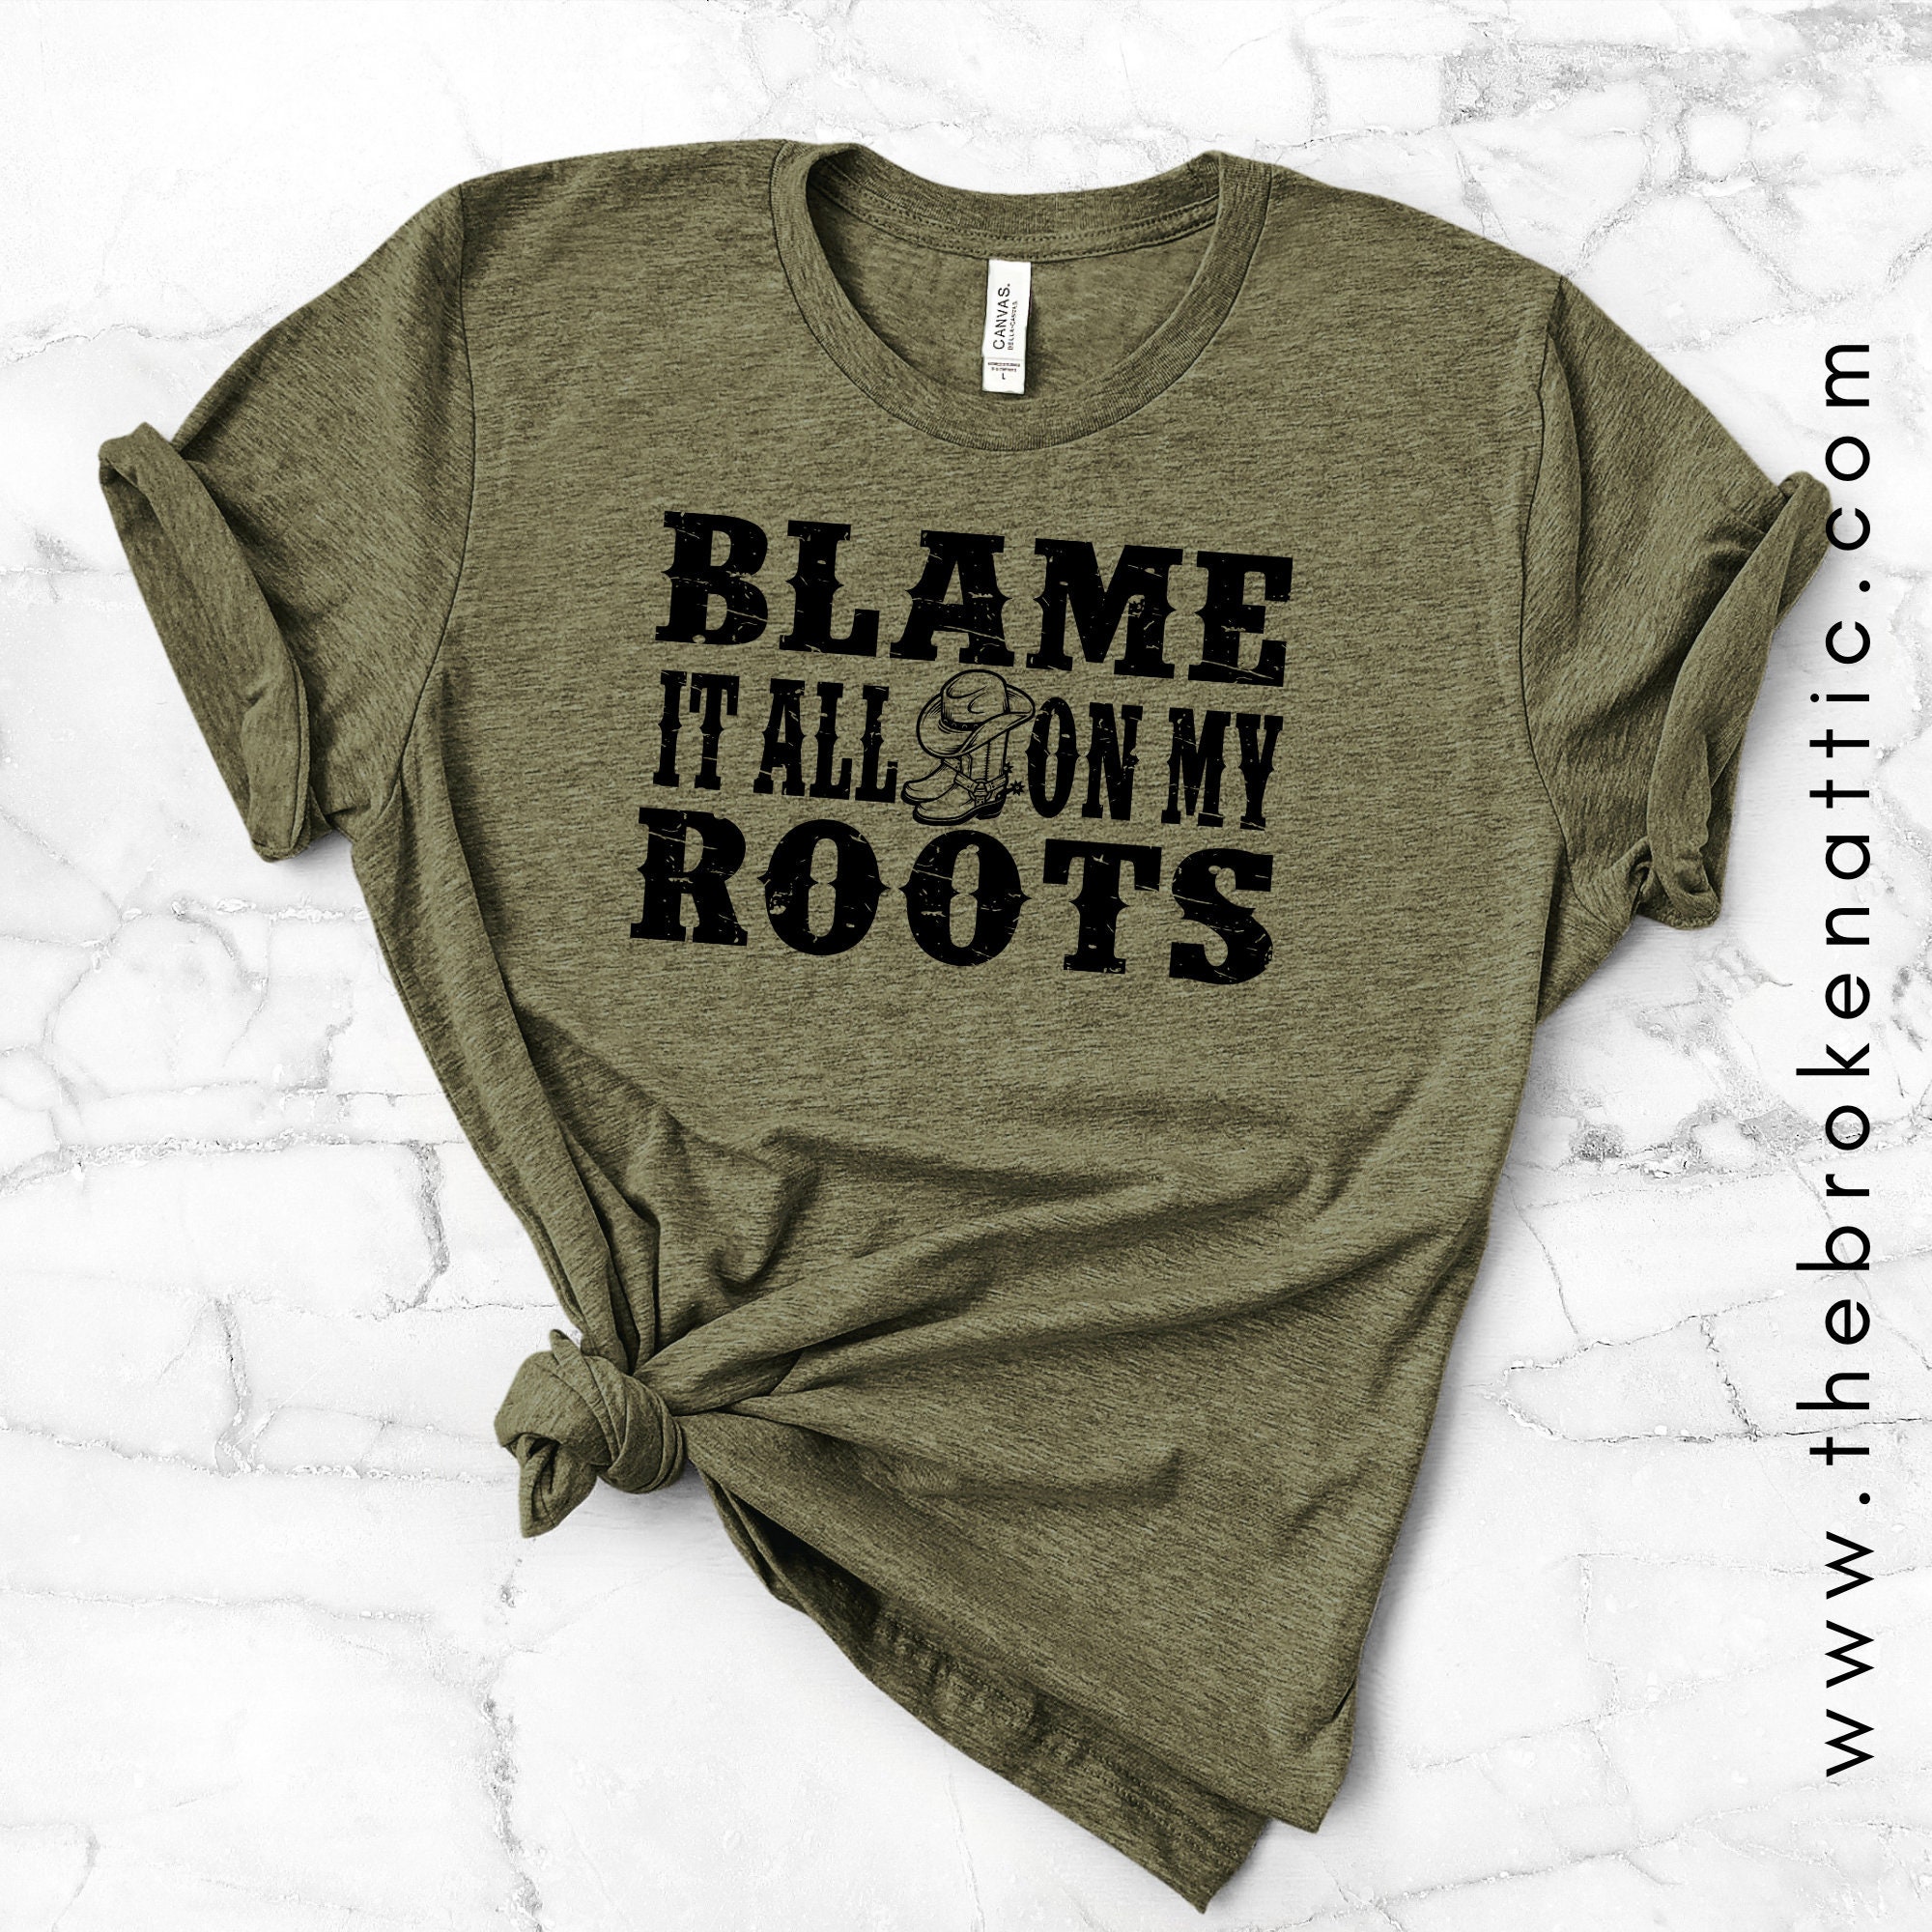 Blame it all on My Roots - T-shirt